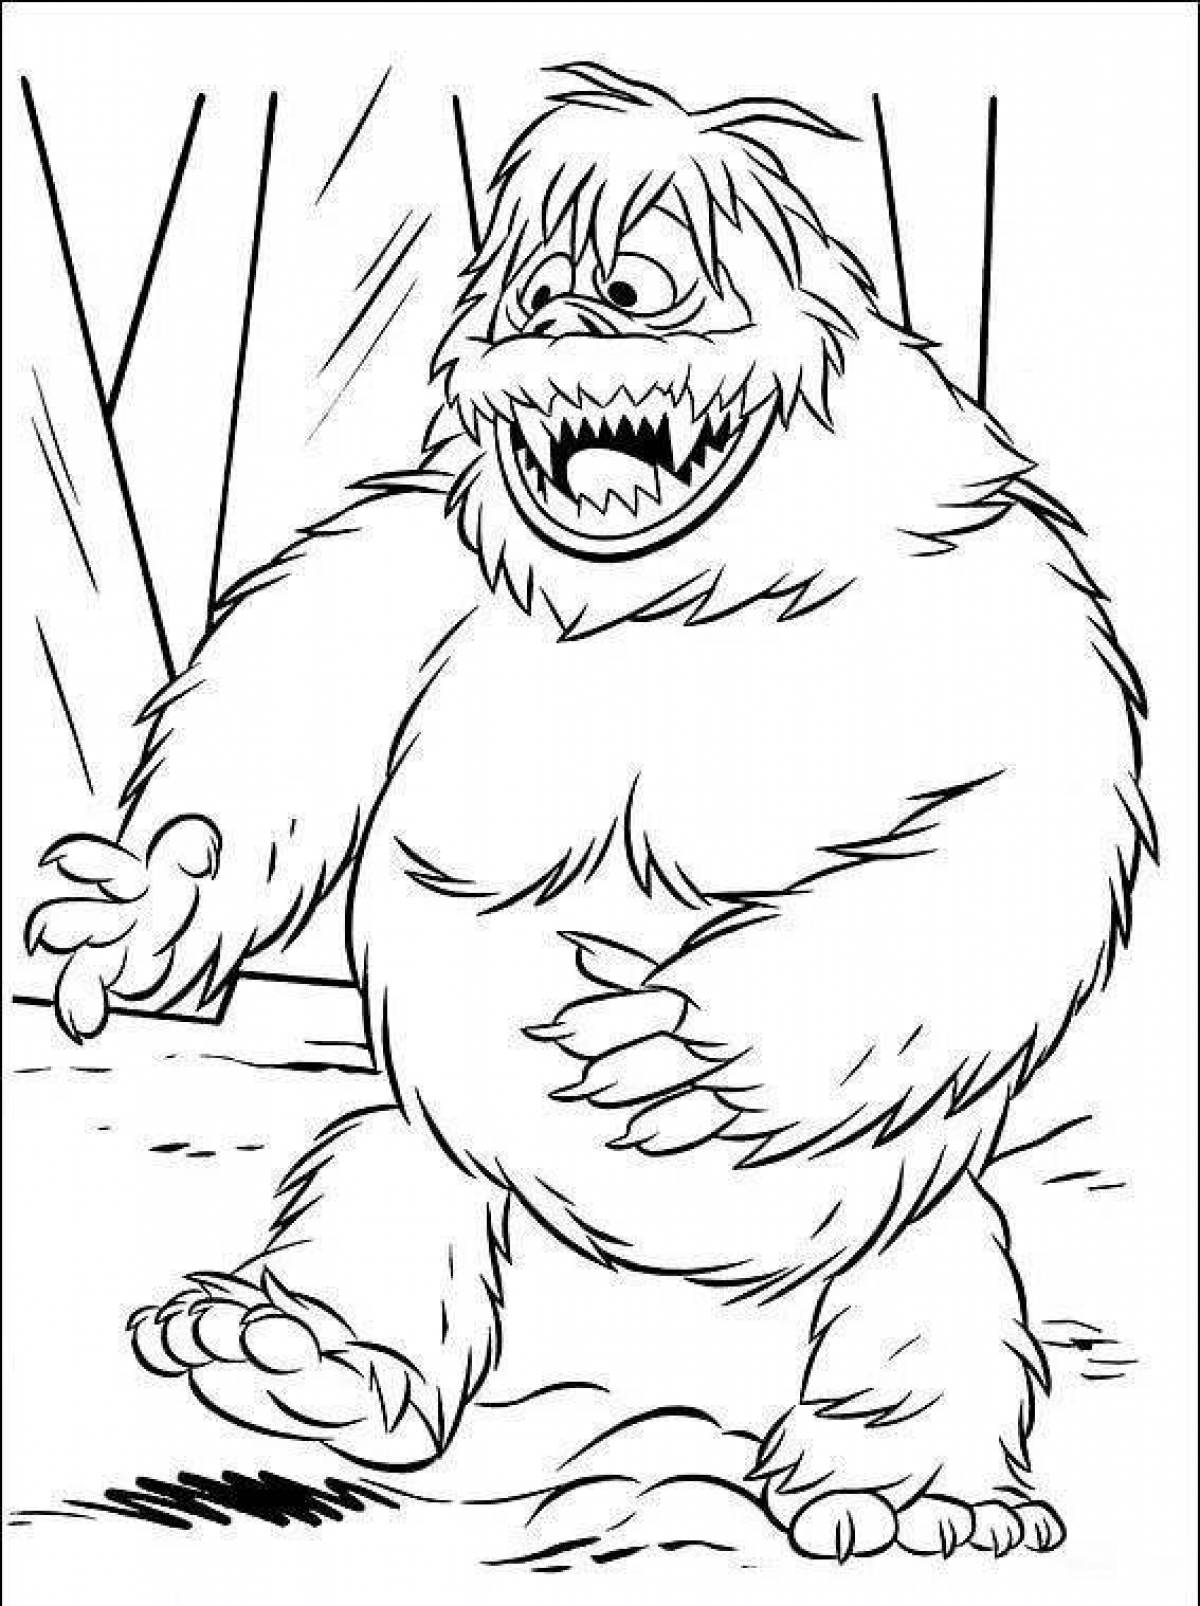 Gorgeous yeti coloring book